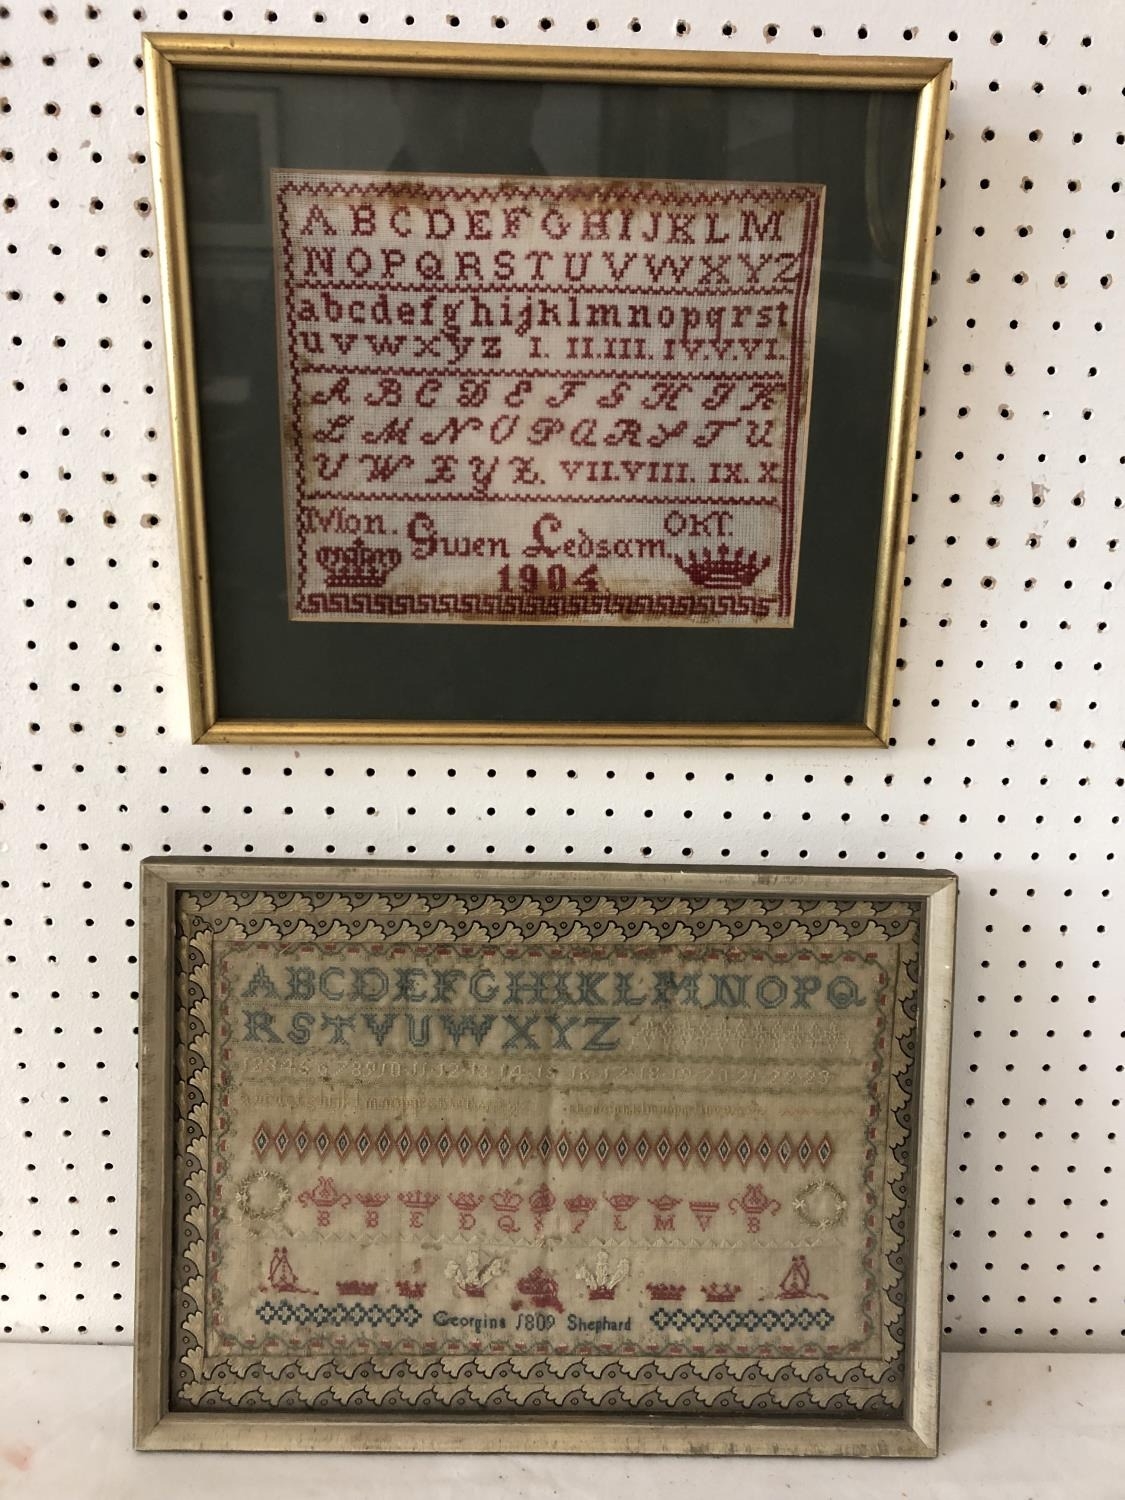 Two 19th and 20th century needlework samplers, by Georgina Shepherd, 1809, and Gwen Ledsam, 1904,